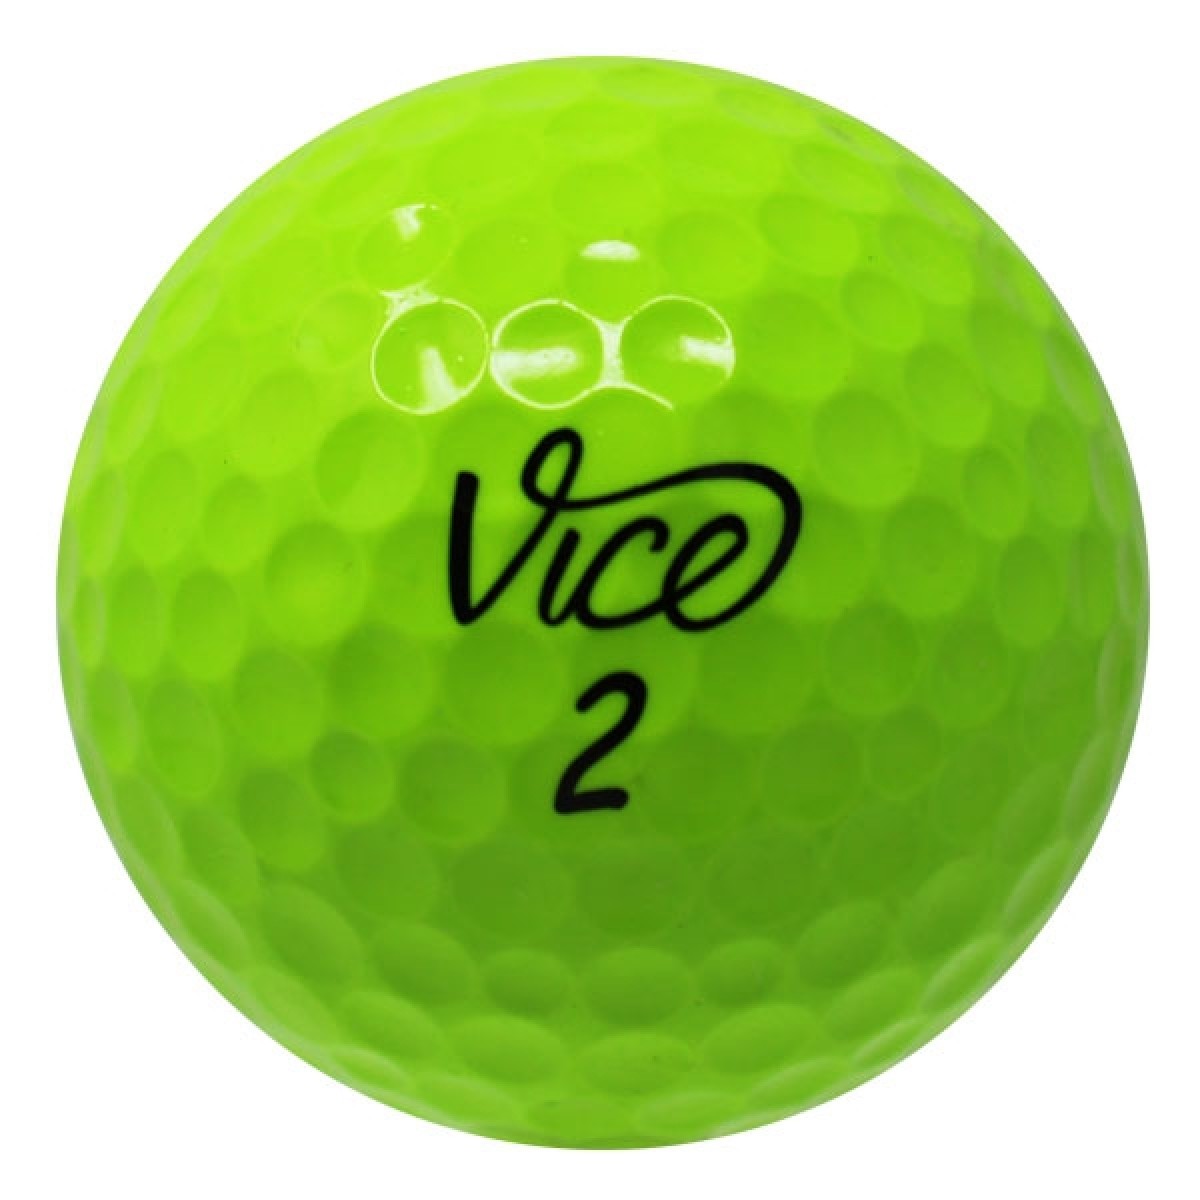 Vice Pro and Pro Plus Mix Lime Green Used Golf Balls | Lostgolfballs.com